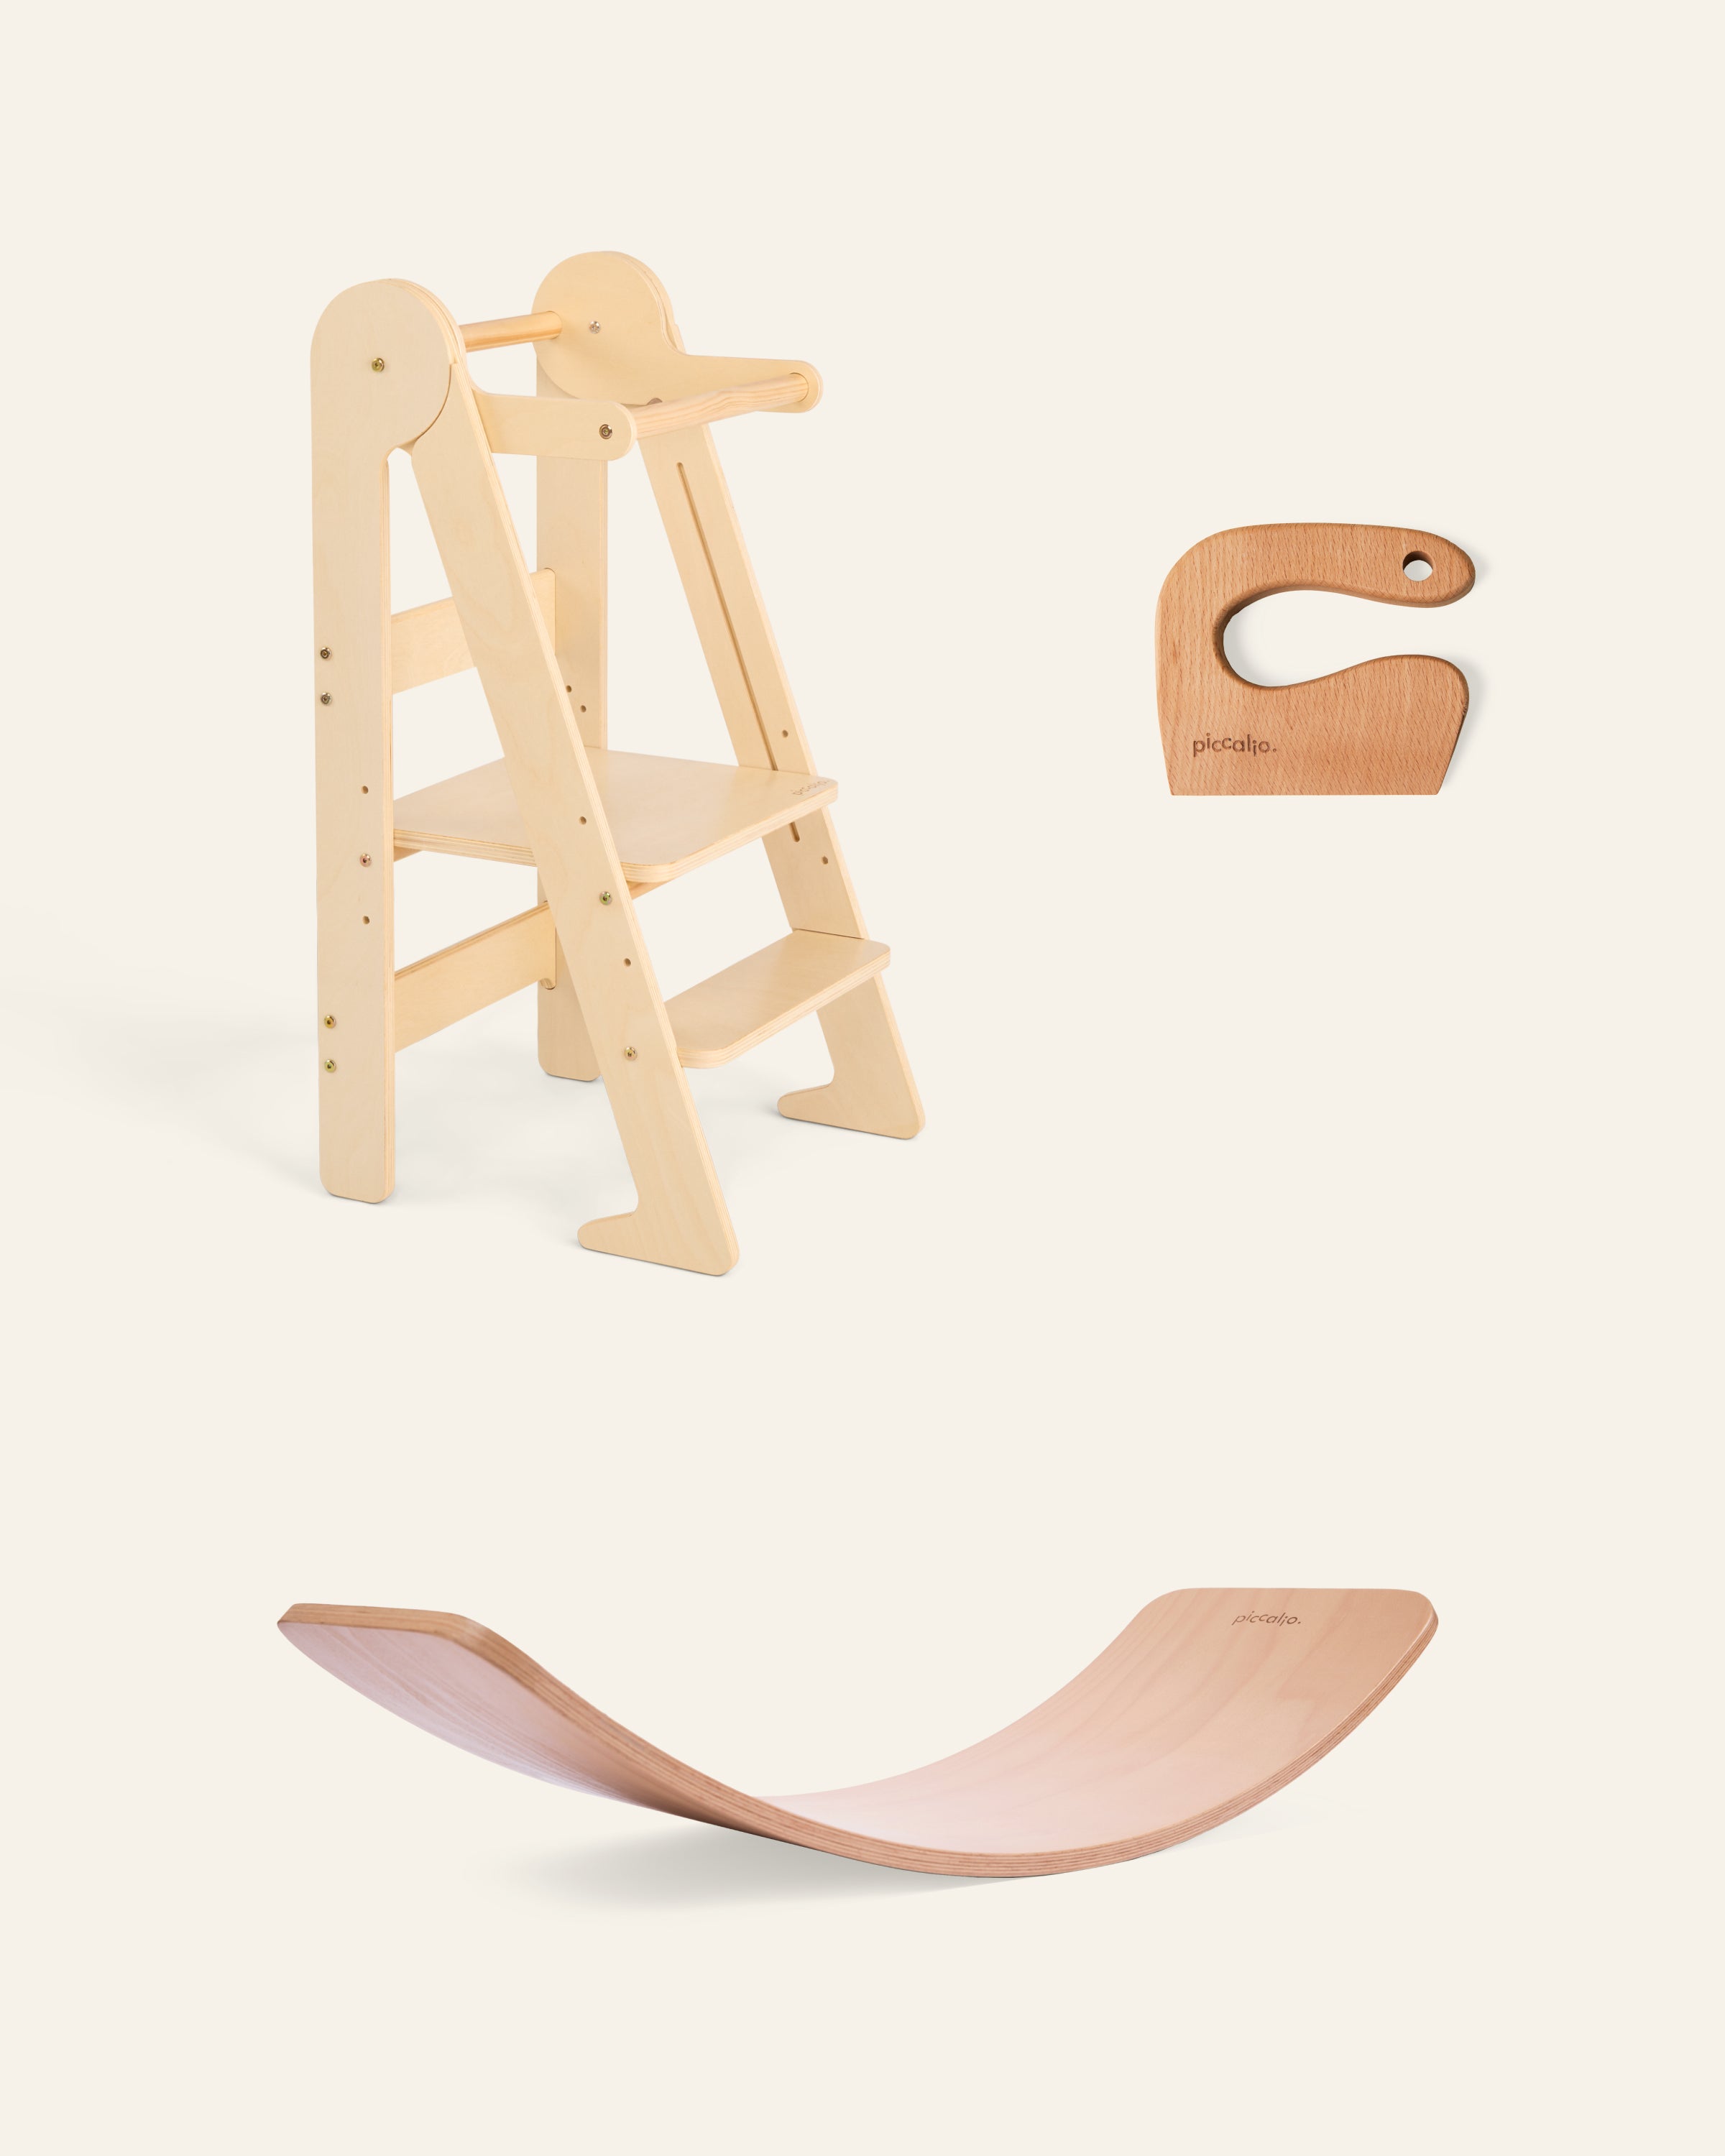 The Foldable Helper Tower and Surfing Set